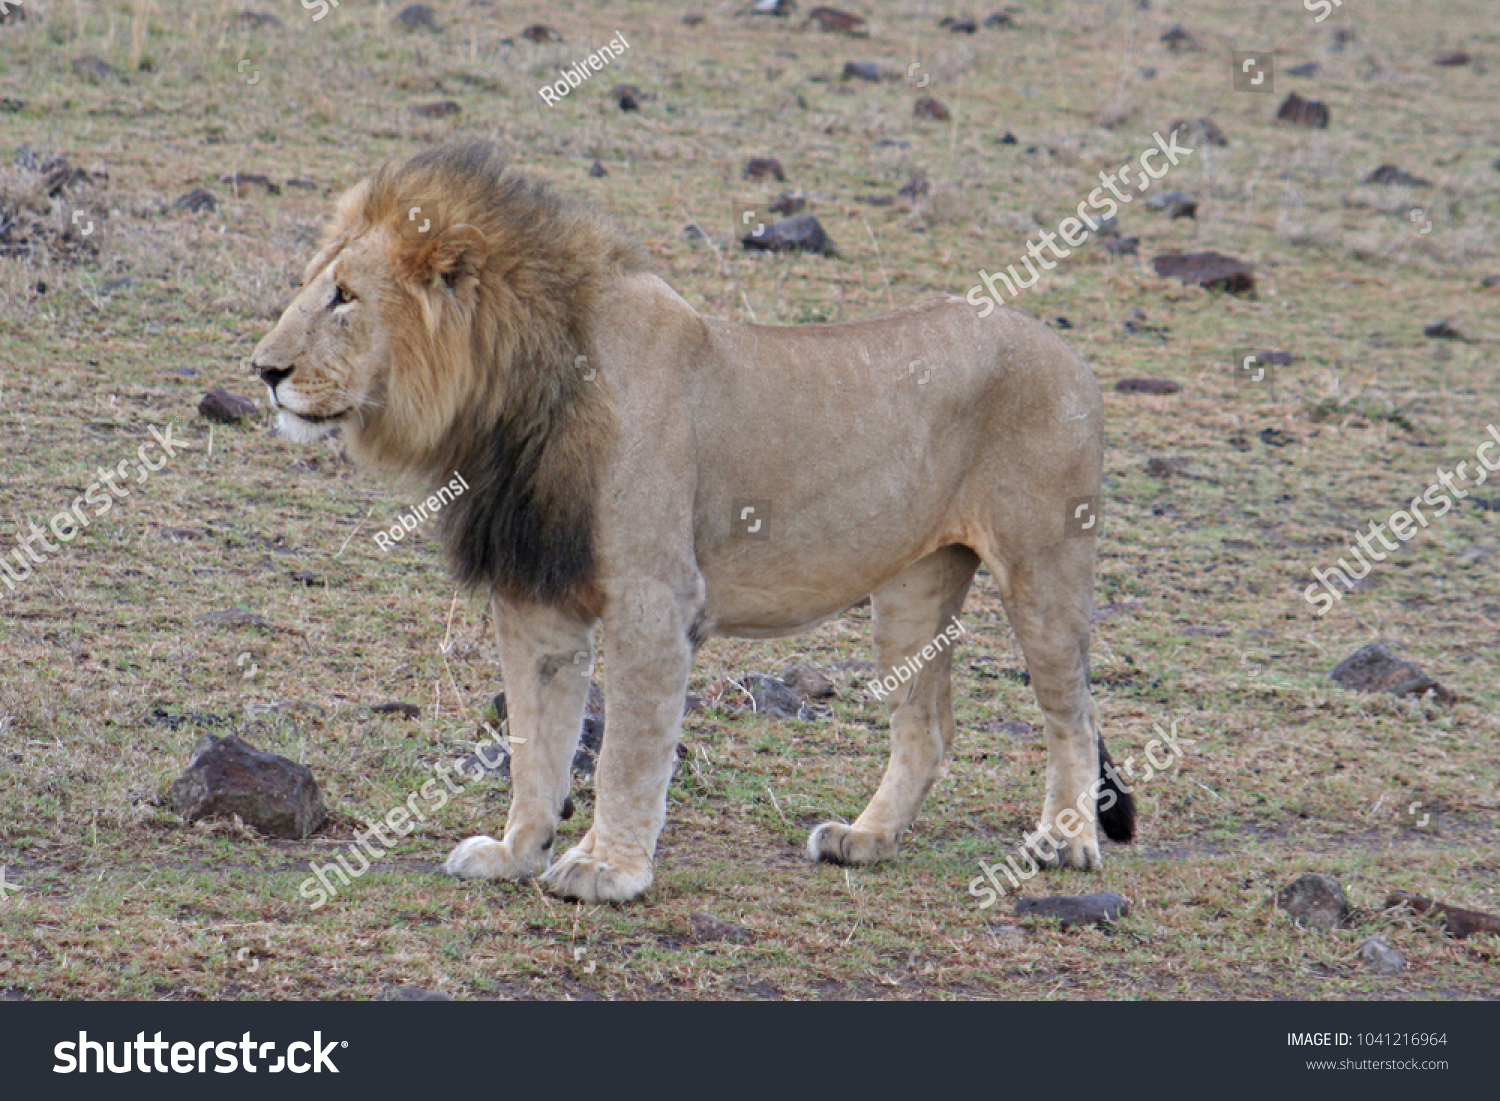 biggest lion in the world ever found